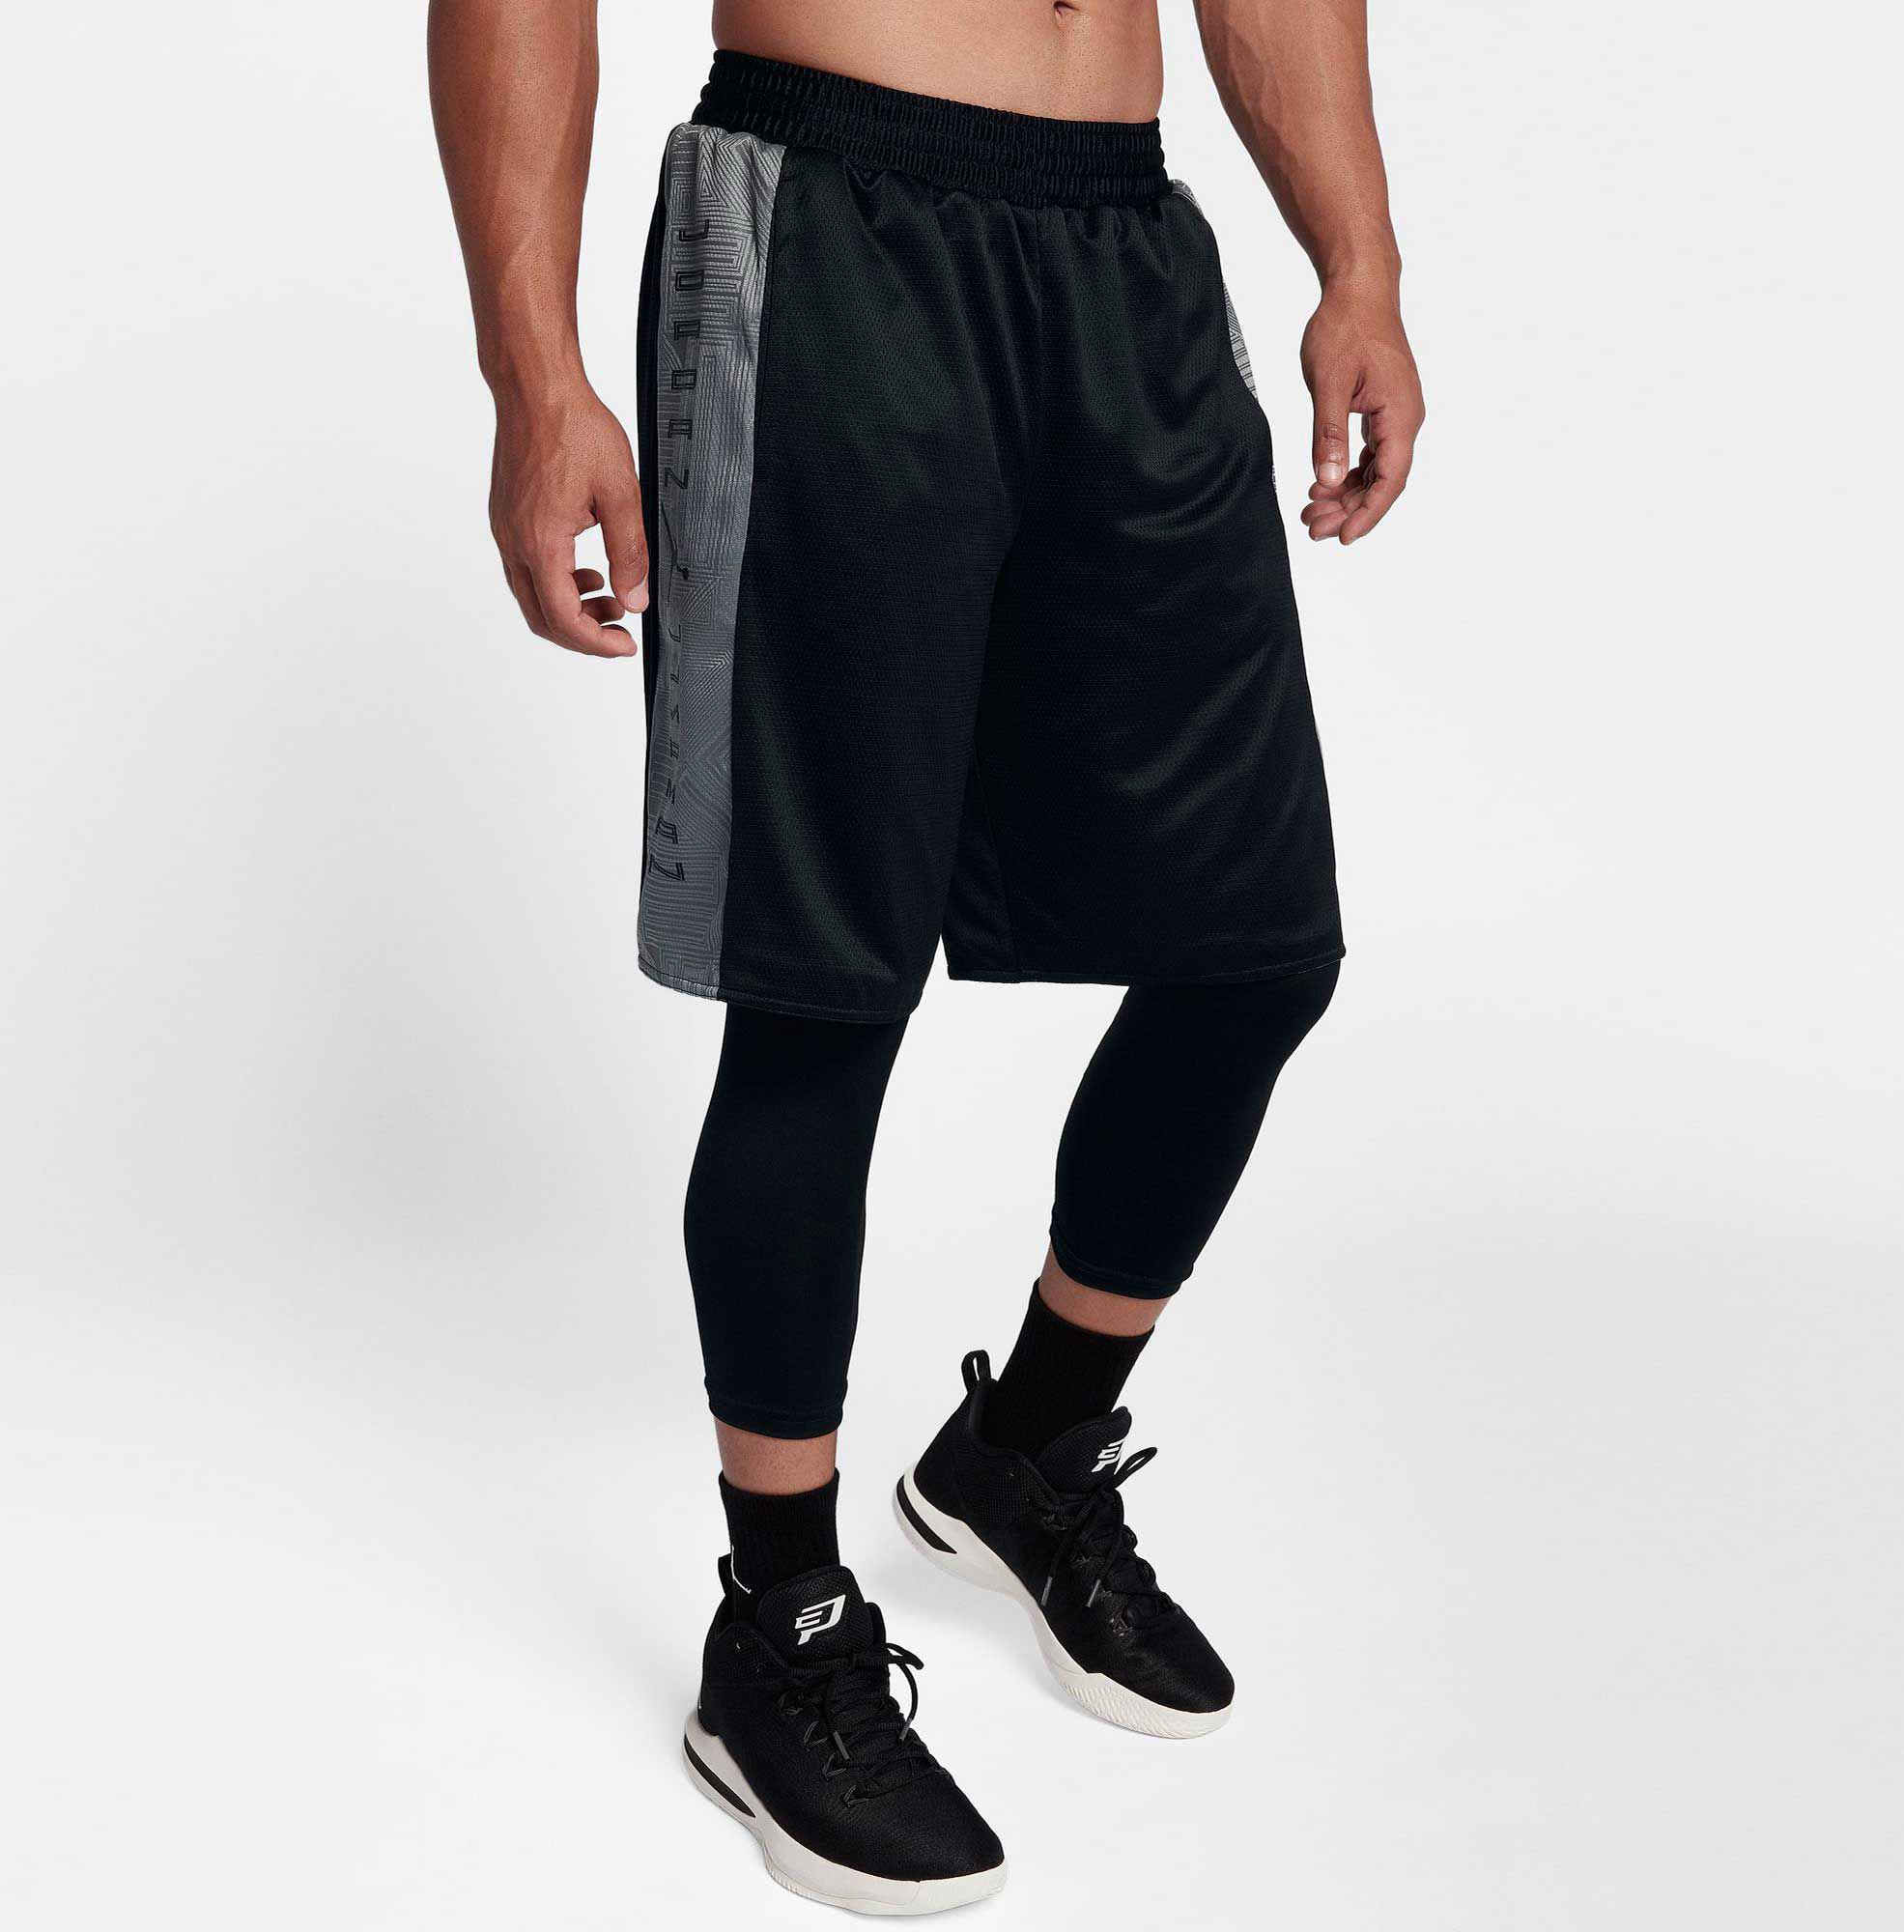 Download Nike Synthetic Air 11 Reversible Basketball Shorts in ...